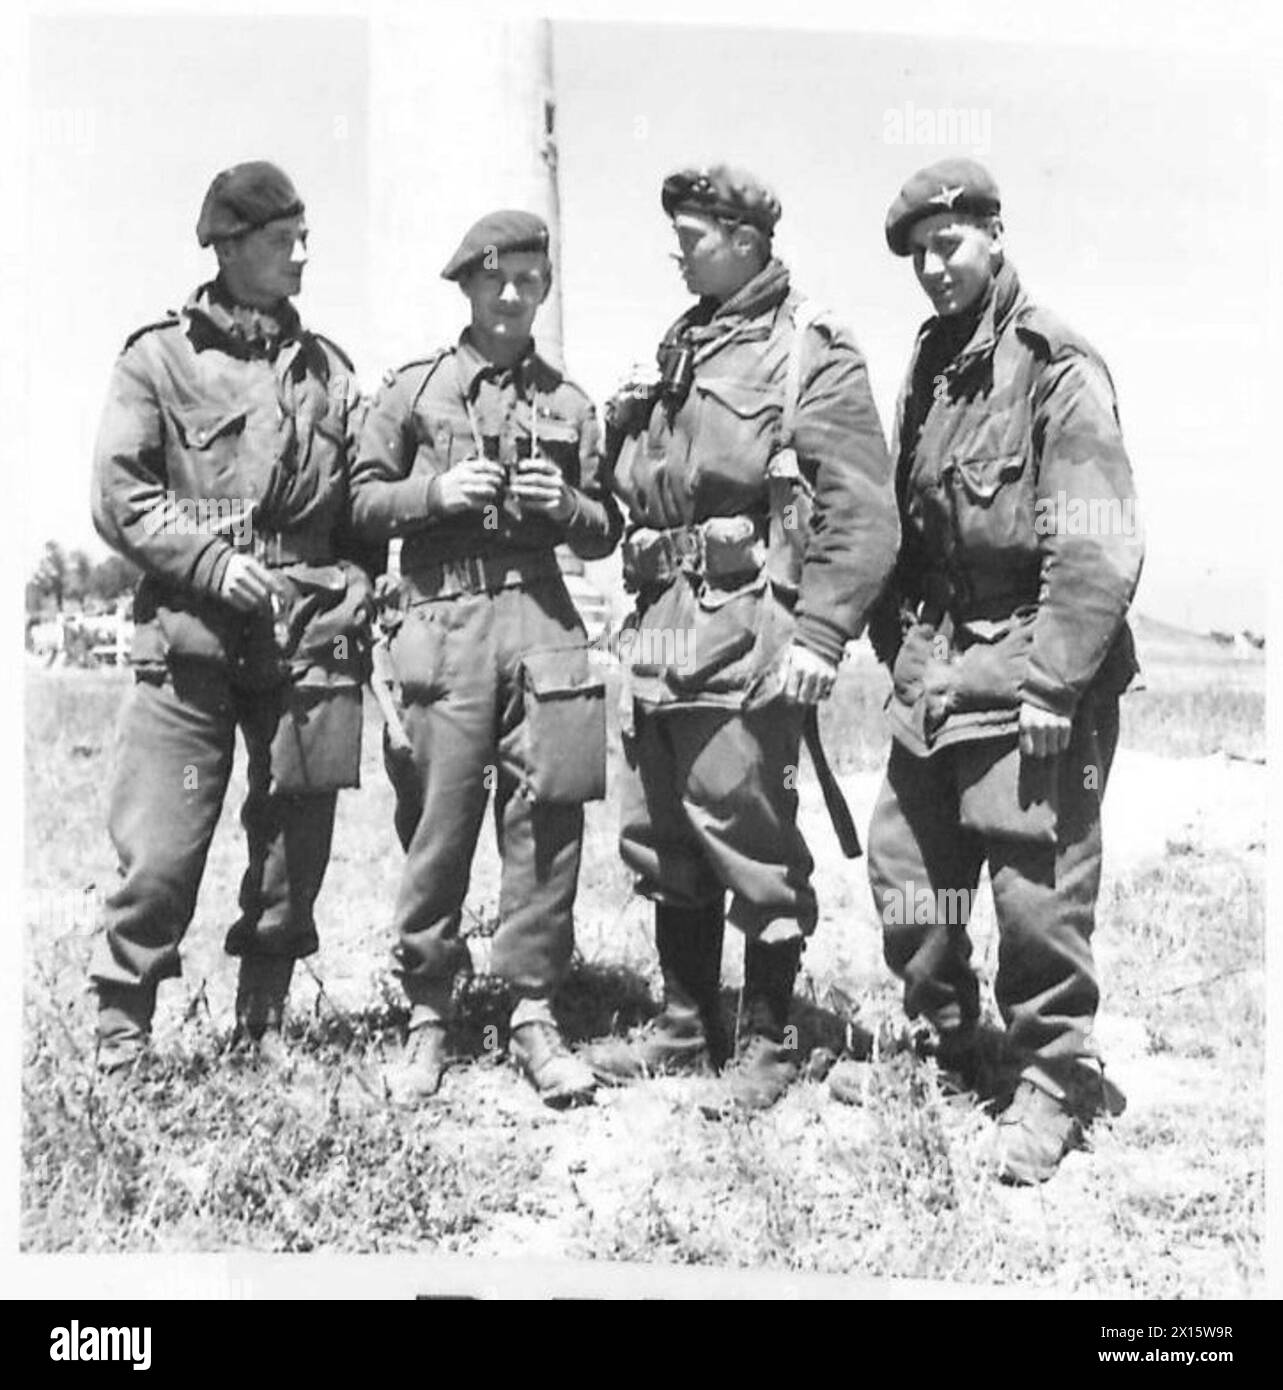 WITH A COMBINED OPERATIONS BOMBARDMENT UNIT - Members of a 'watch' coming off duty. Left to right:- Telegraphist W. Fortune of 22 Wood Street, Middlestone Moor, Nr. Spennymoor, Co.Durham, who landed on 'D' Day by parachute; Telegraphist A. J. Boomer, DSM; Captain F. Vere Hodge, MC,Huntspill, Highbridge, Somerset, and Telegraphist K. F. Moles of 112 Stortford Road, Rye Park, Hoddesdon, Herts British Army, 21st Army Group Stock Photo